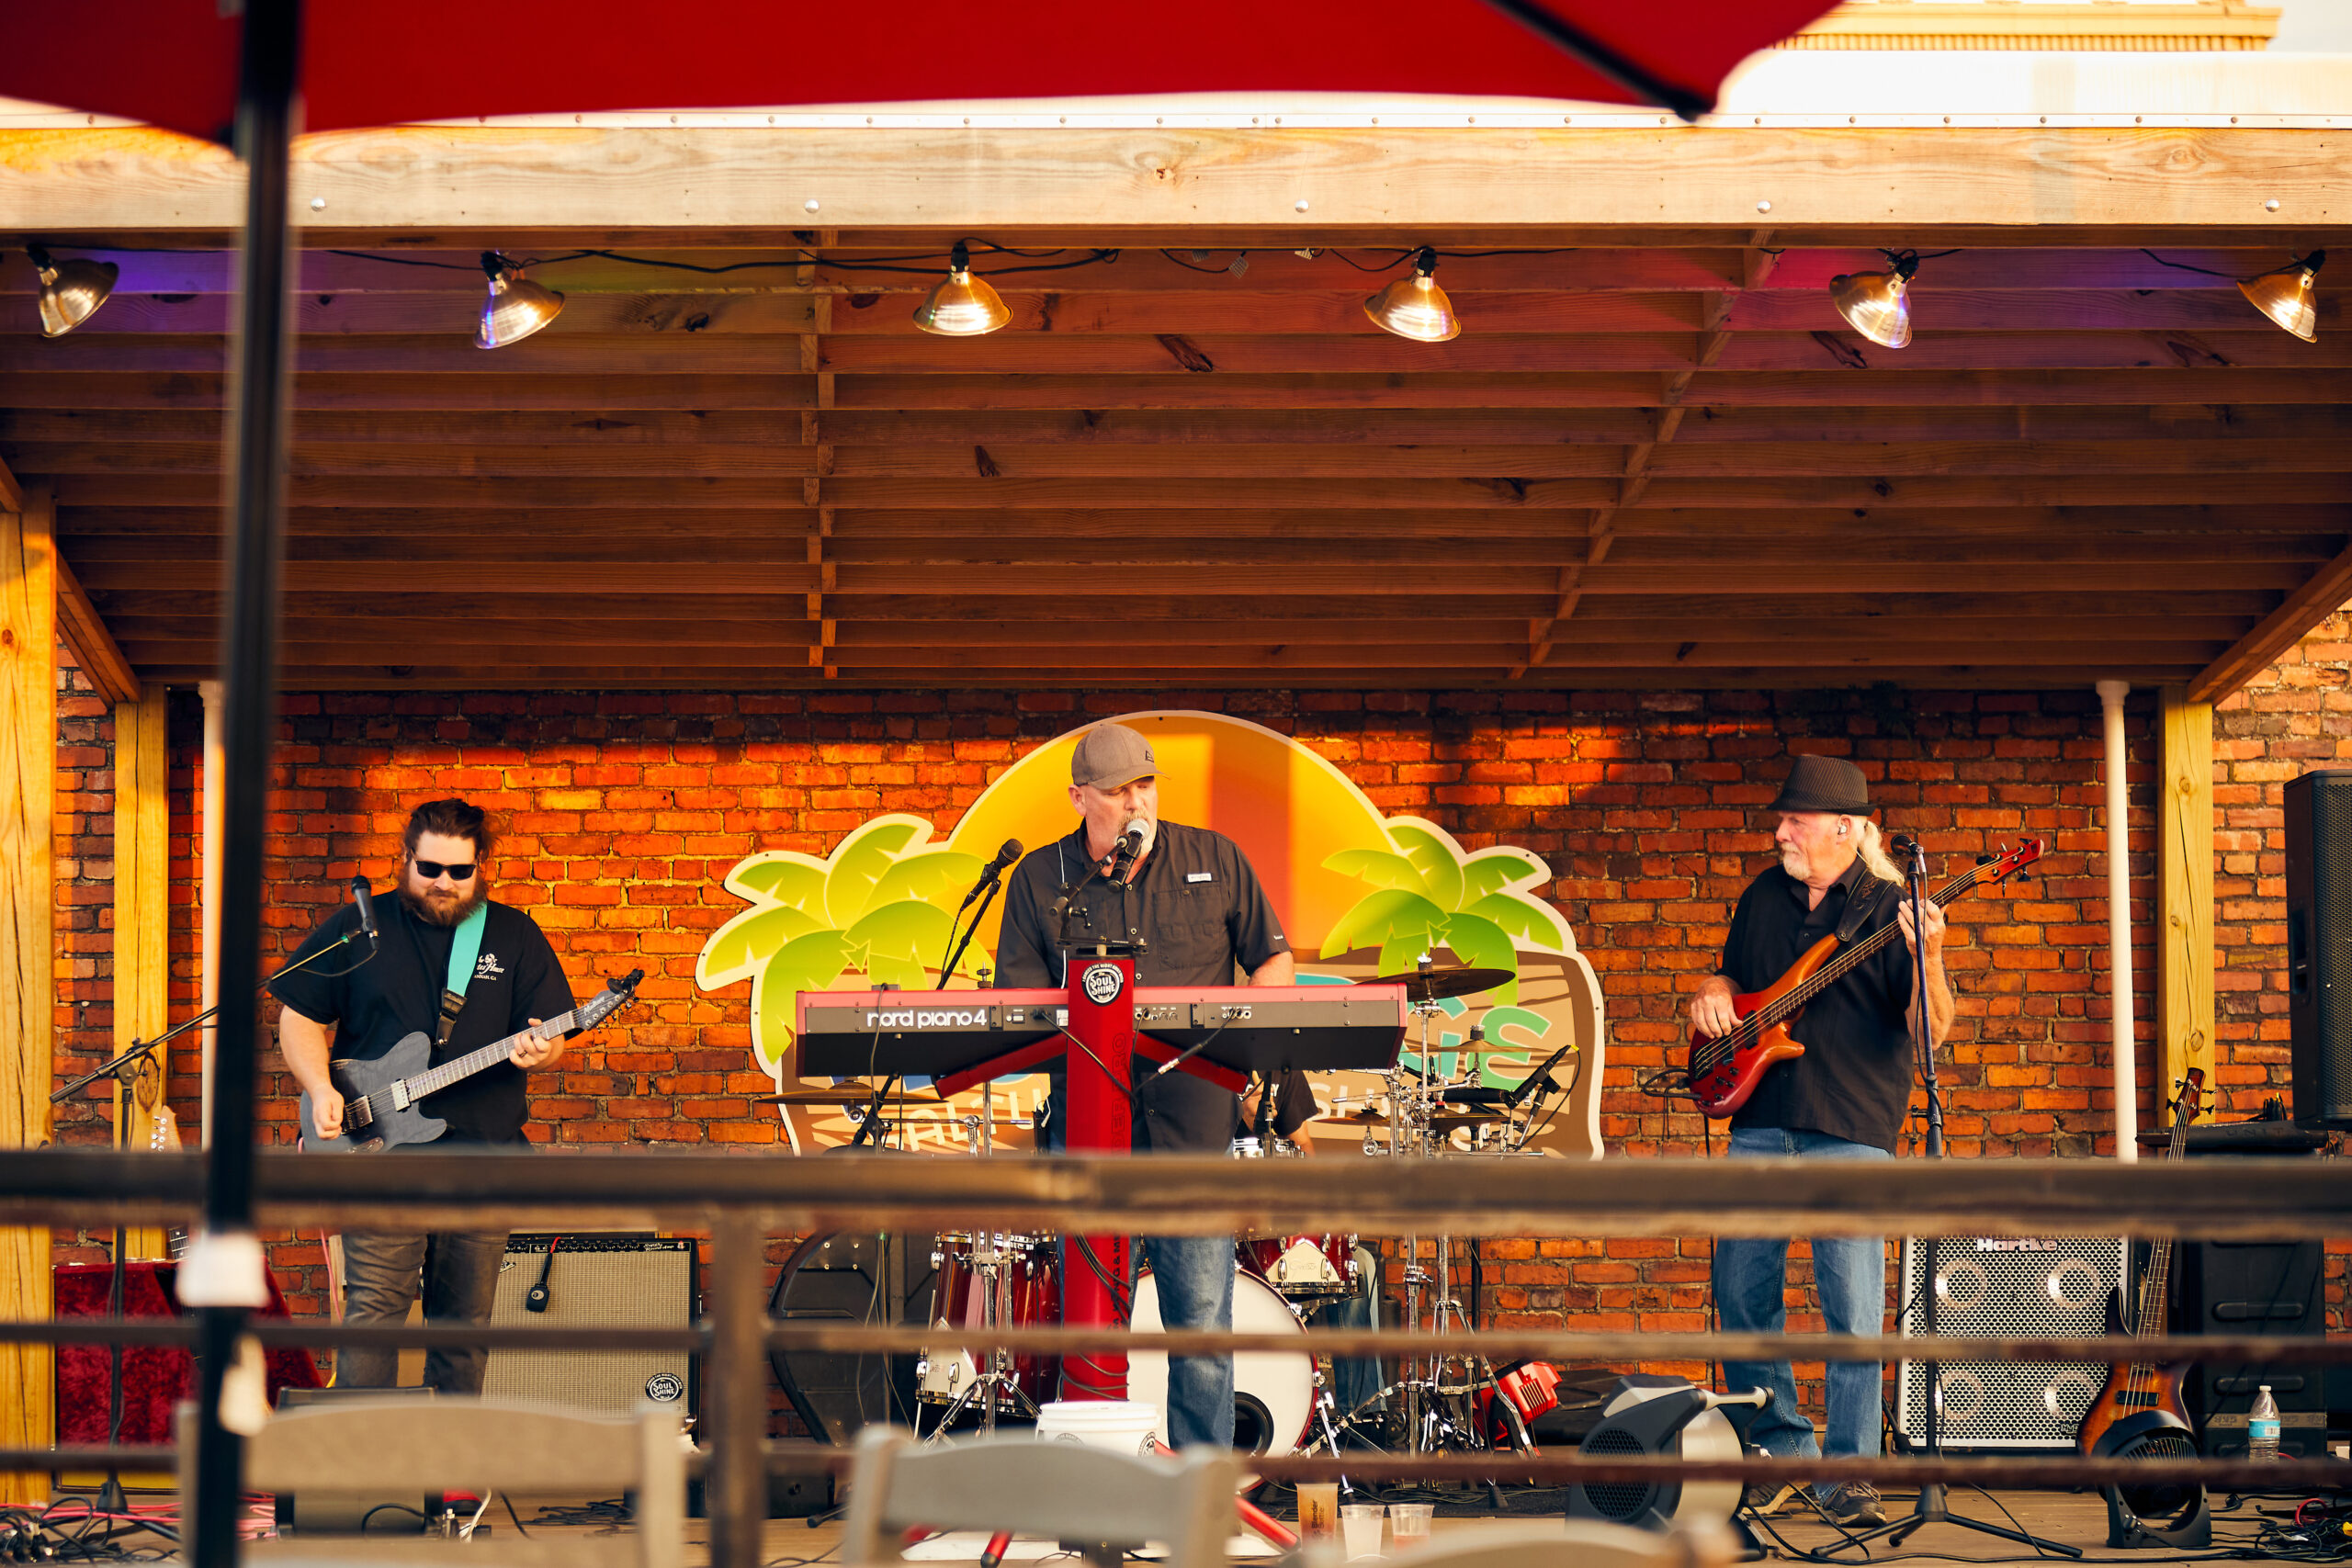 Soul Shine Band rocks out on the stage at Saltwater Fishery's Flybridge